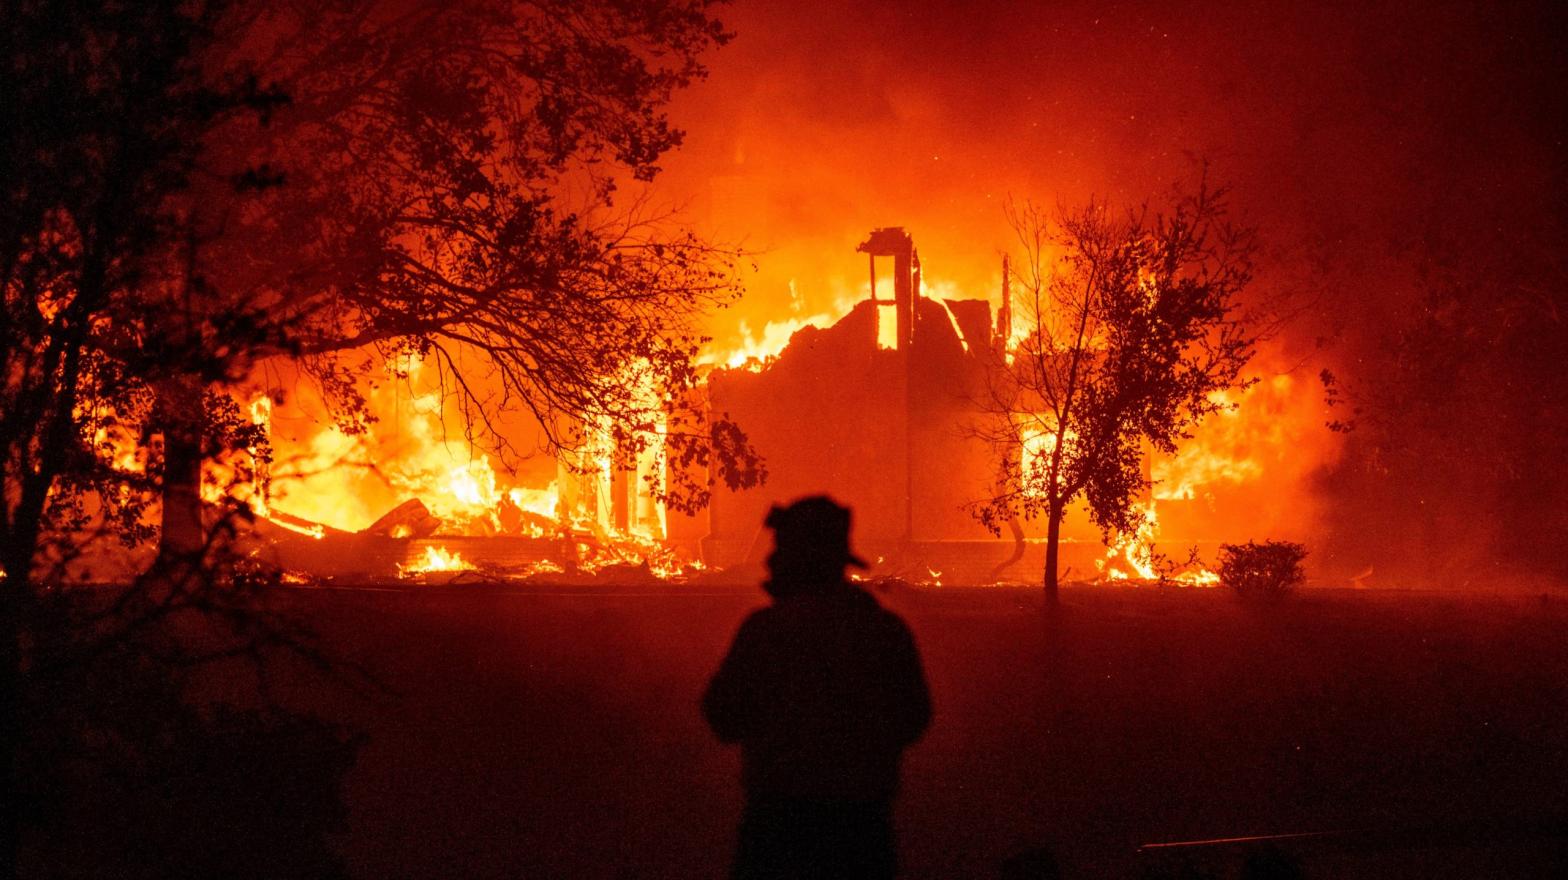 A home burns in Vacaville, California, during the LNU Lightning Complex fire on August 19, 2020. (Photo: Josh Edelson, Getty Images)